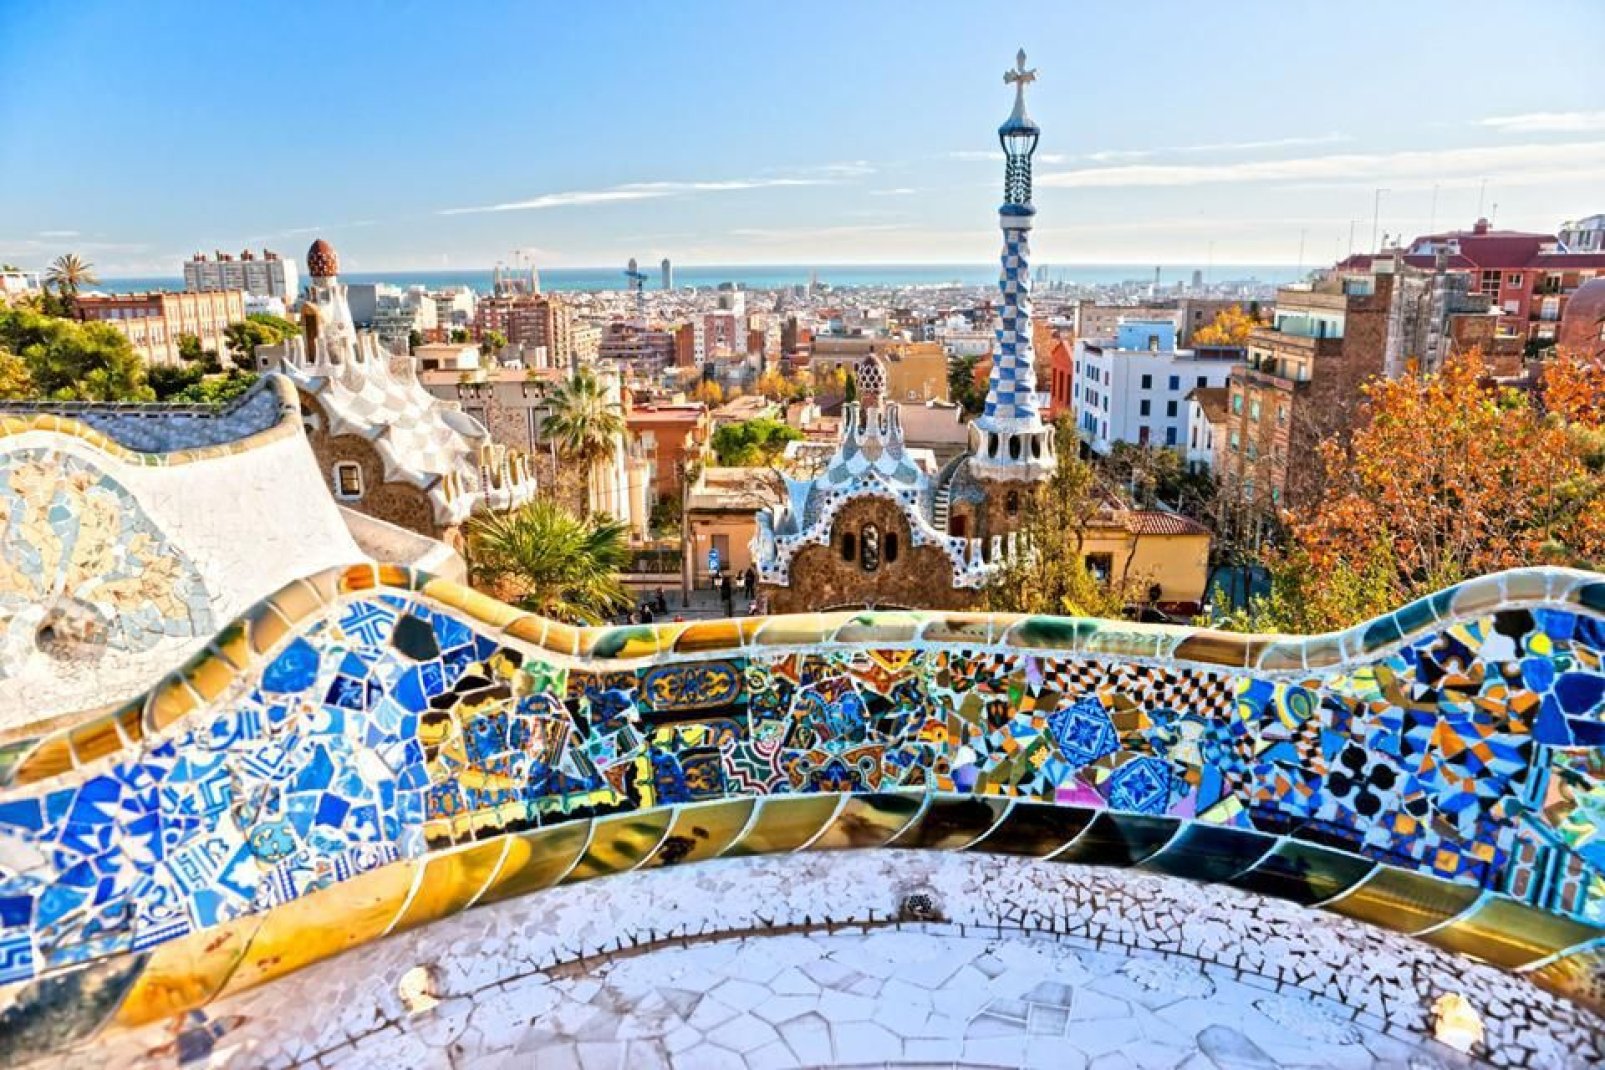 Park Güell, designed by Antoni Gaudi, has been listed as a UNESCO World Heritage Site since 1984. The original shapes of its structures pay tribute to nature.